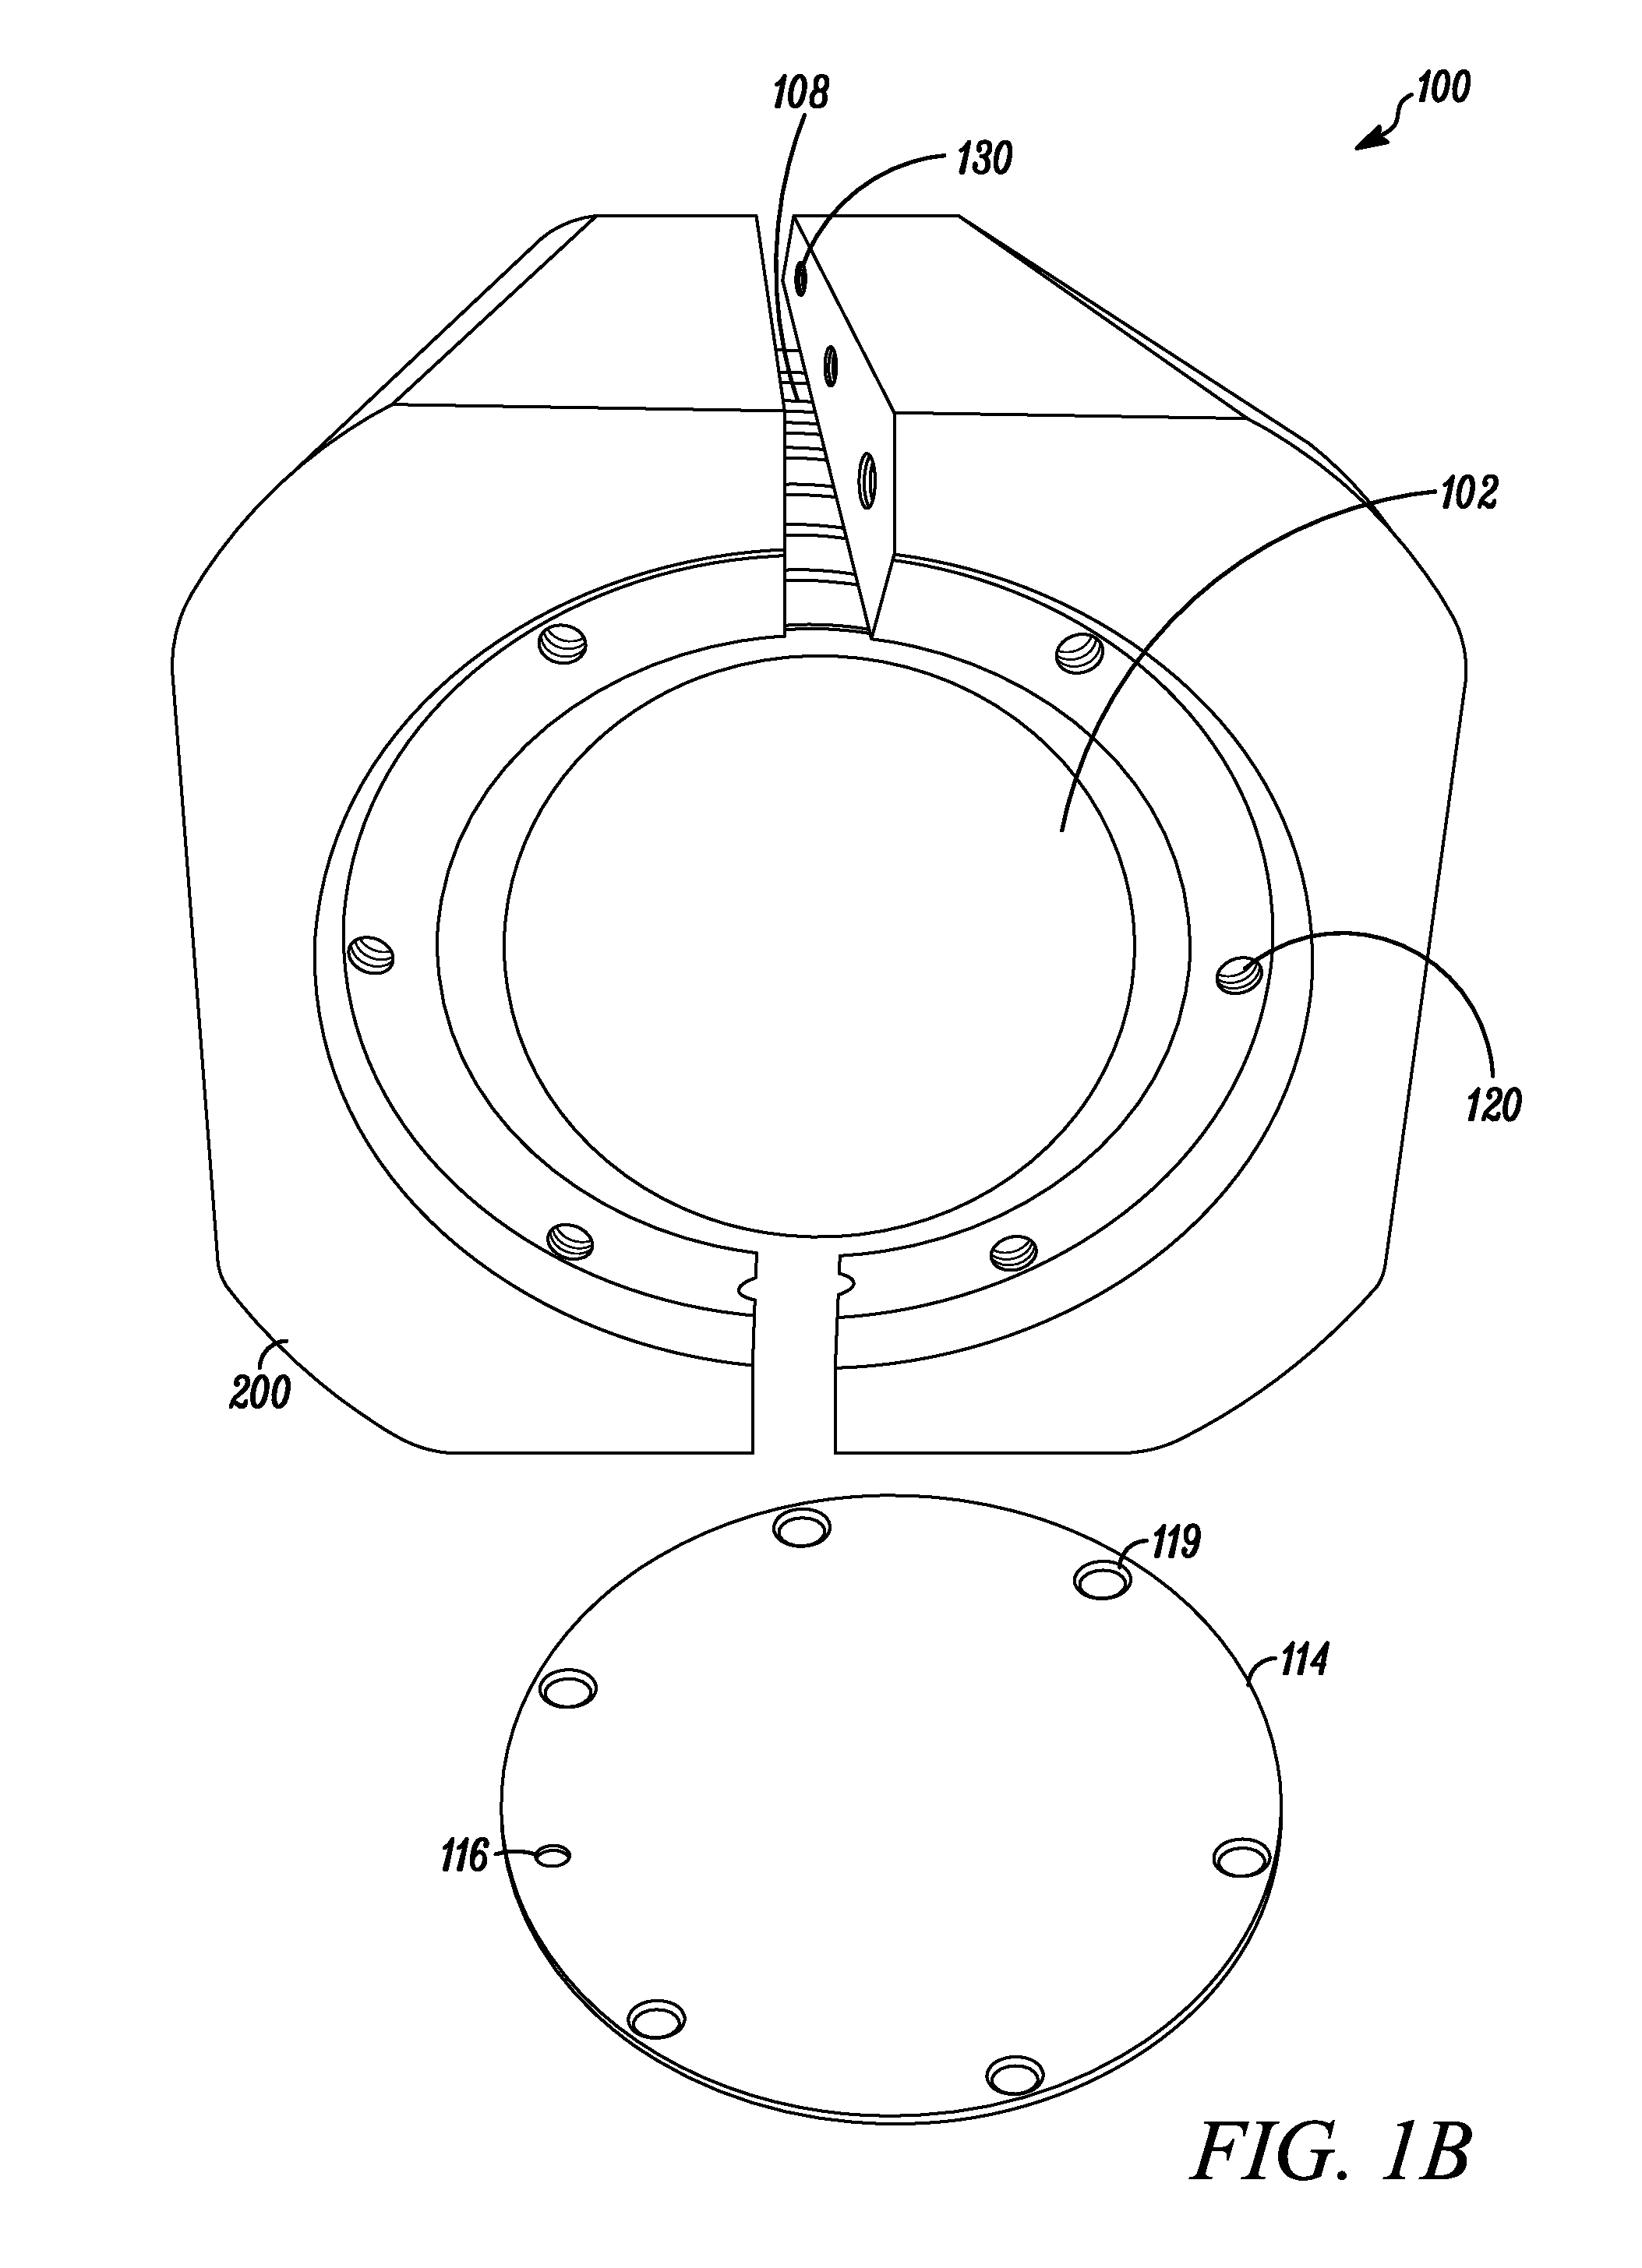 Process and apparatus for continuous flow synthesis of nanocrystals